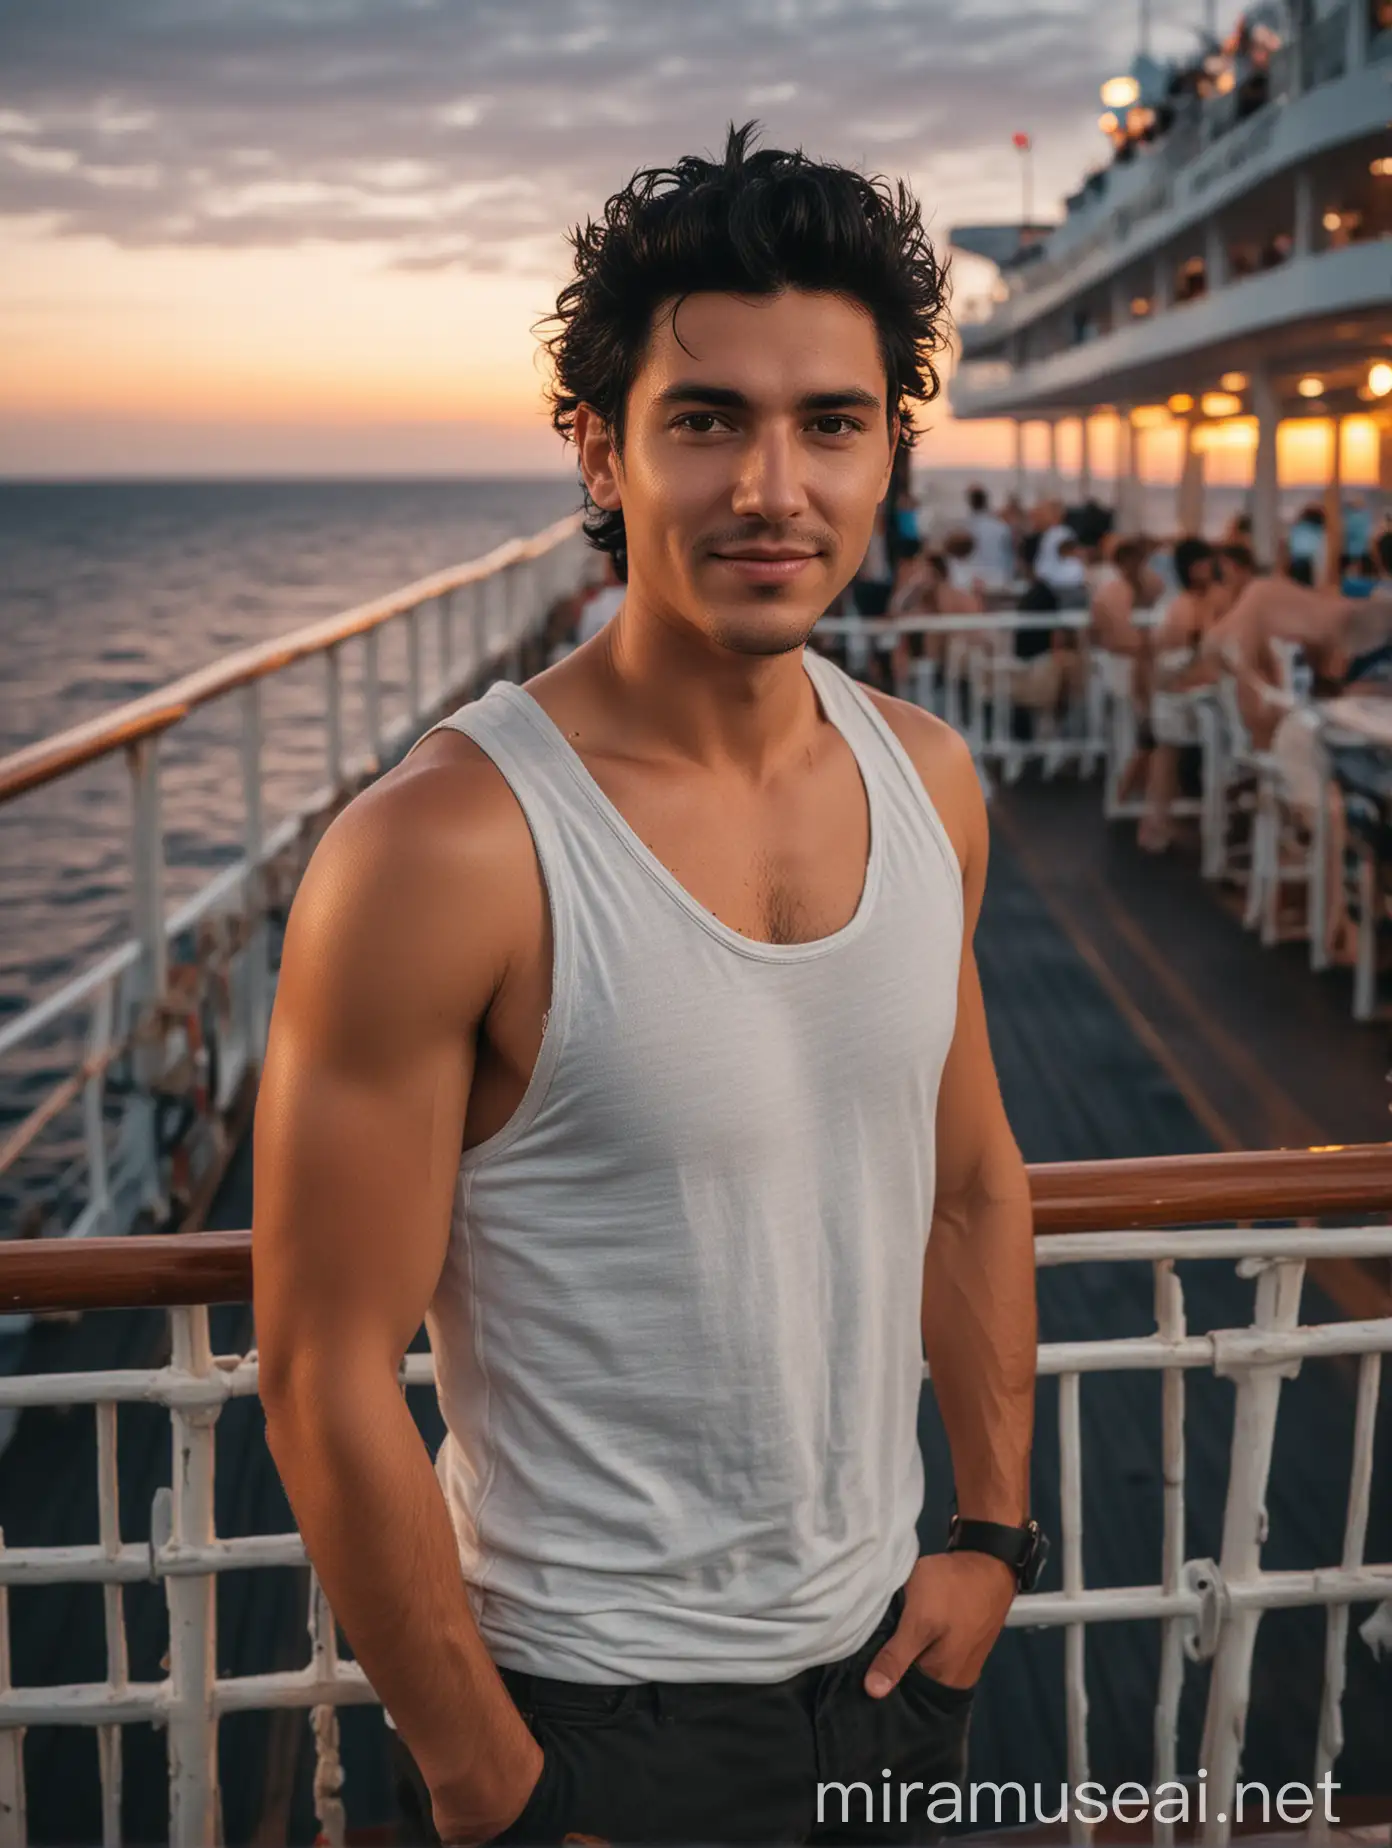 Cinematic photography, focused focus showing the atmosphere on the deck of a cruise ship at sunset, you can see a handsome man with spiky black hair wearing singlet standing on his back  on the ship's railing with his back to the ocean, at the night quiet atmosphere, smiling at the camera